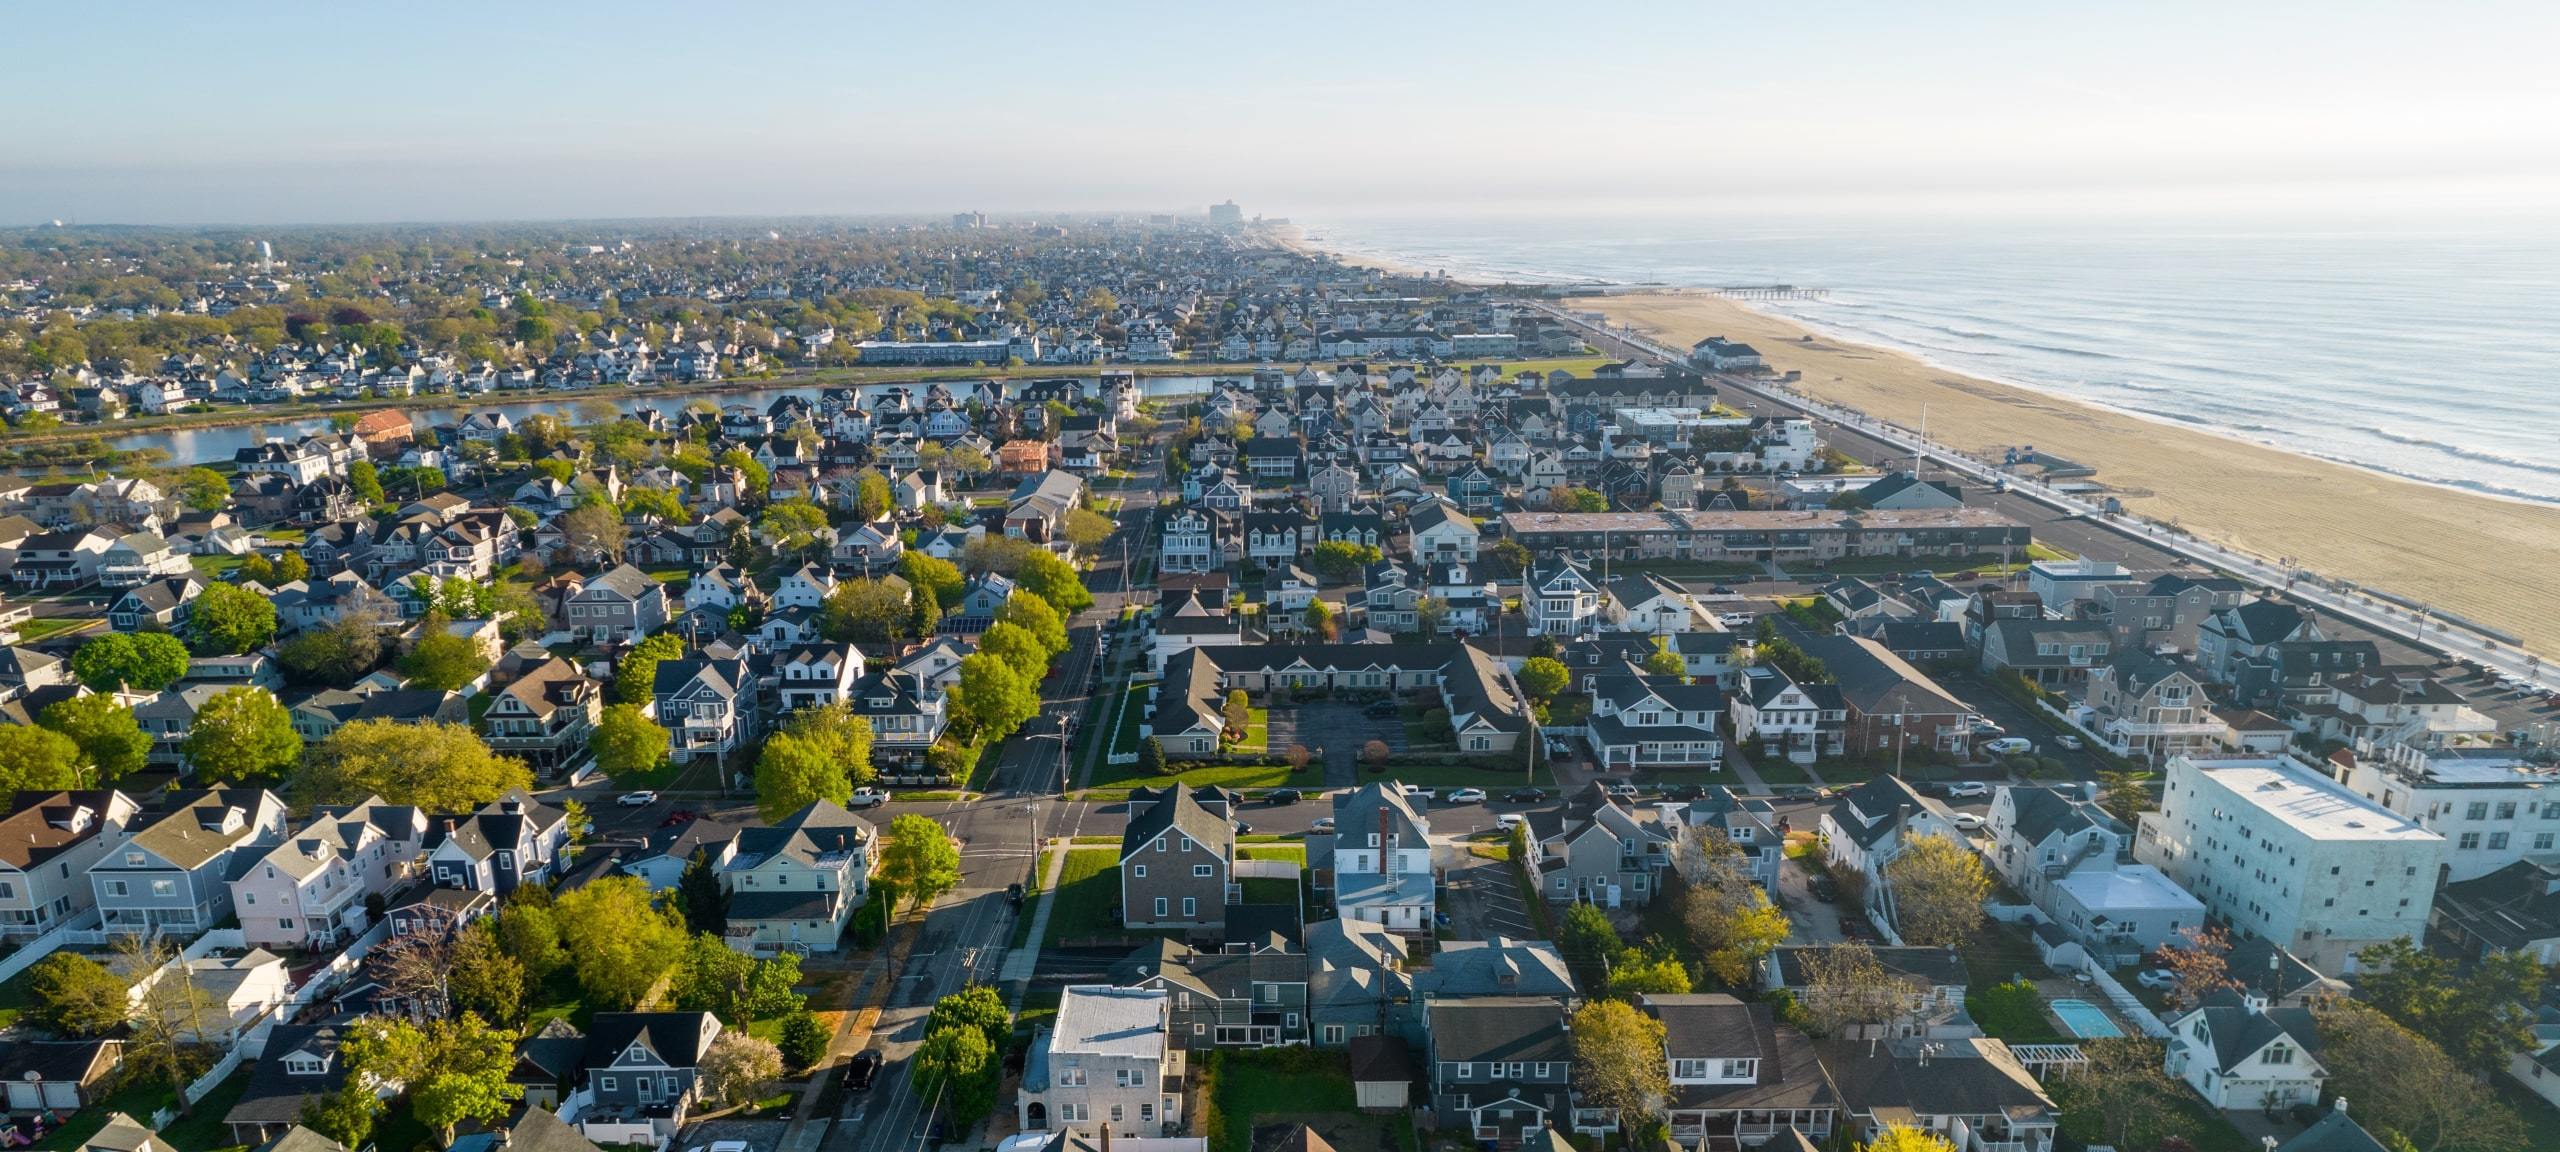 Aerial view of luxury beach homes along the Jersey Shore during summer